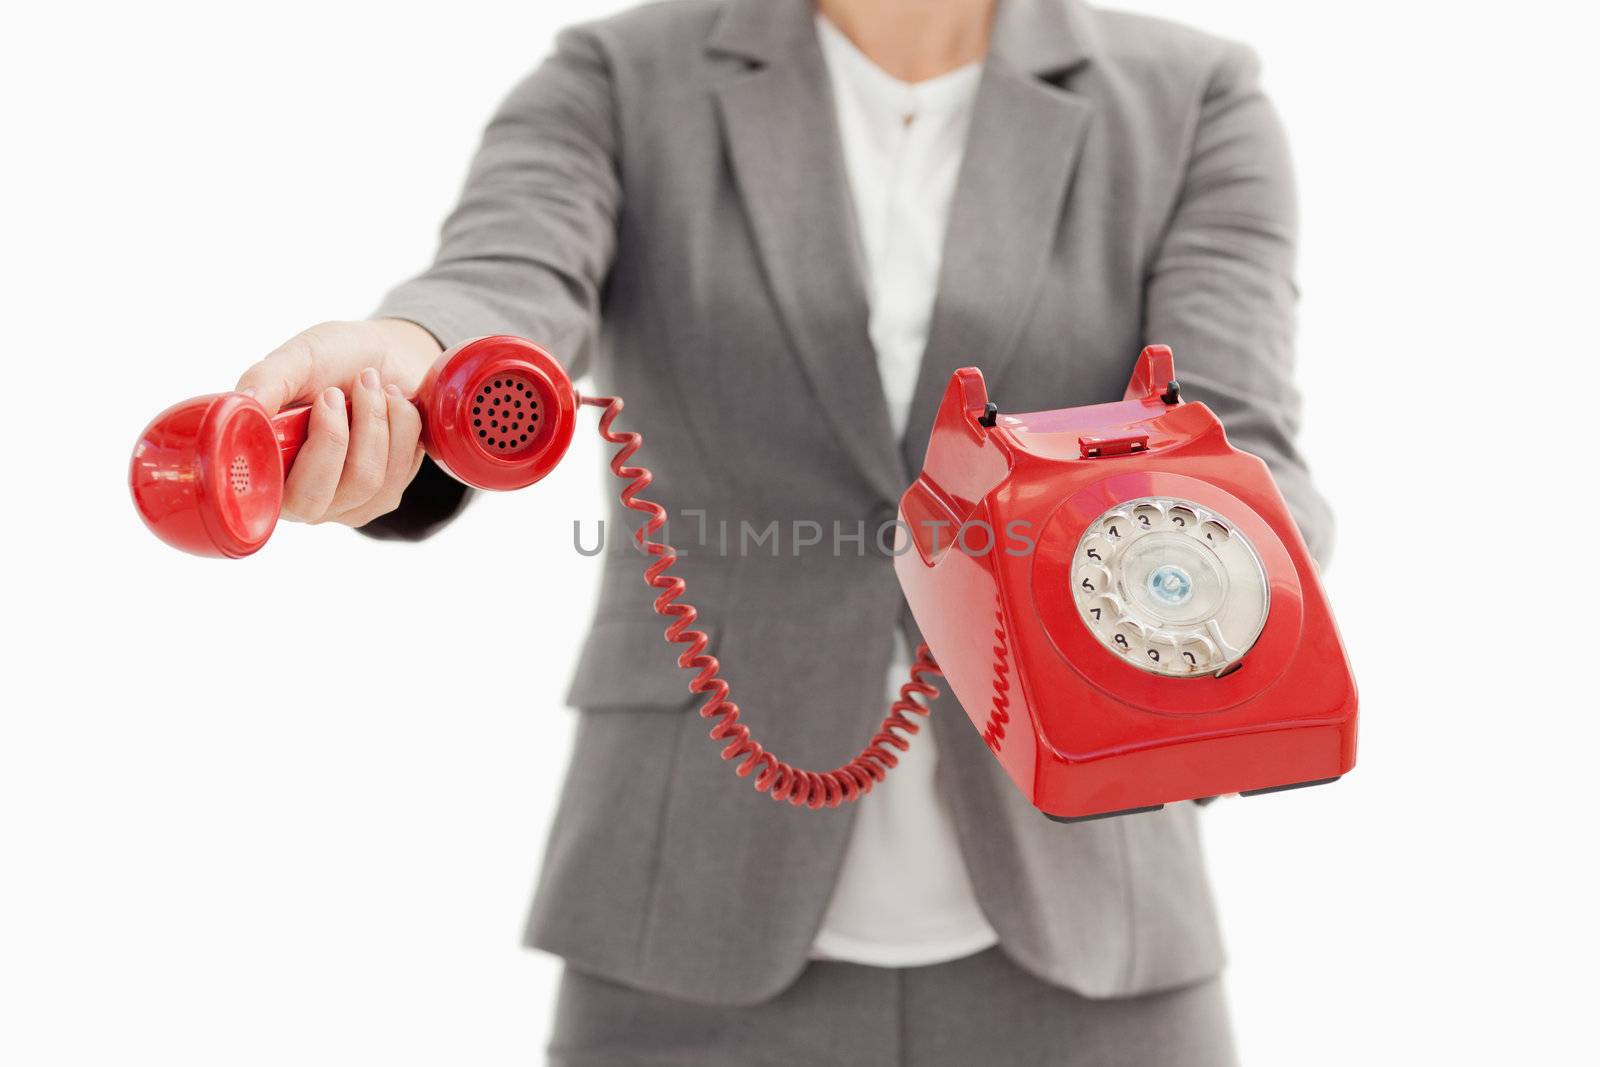 A business person is holding a phone